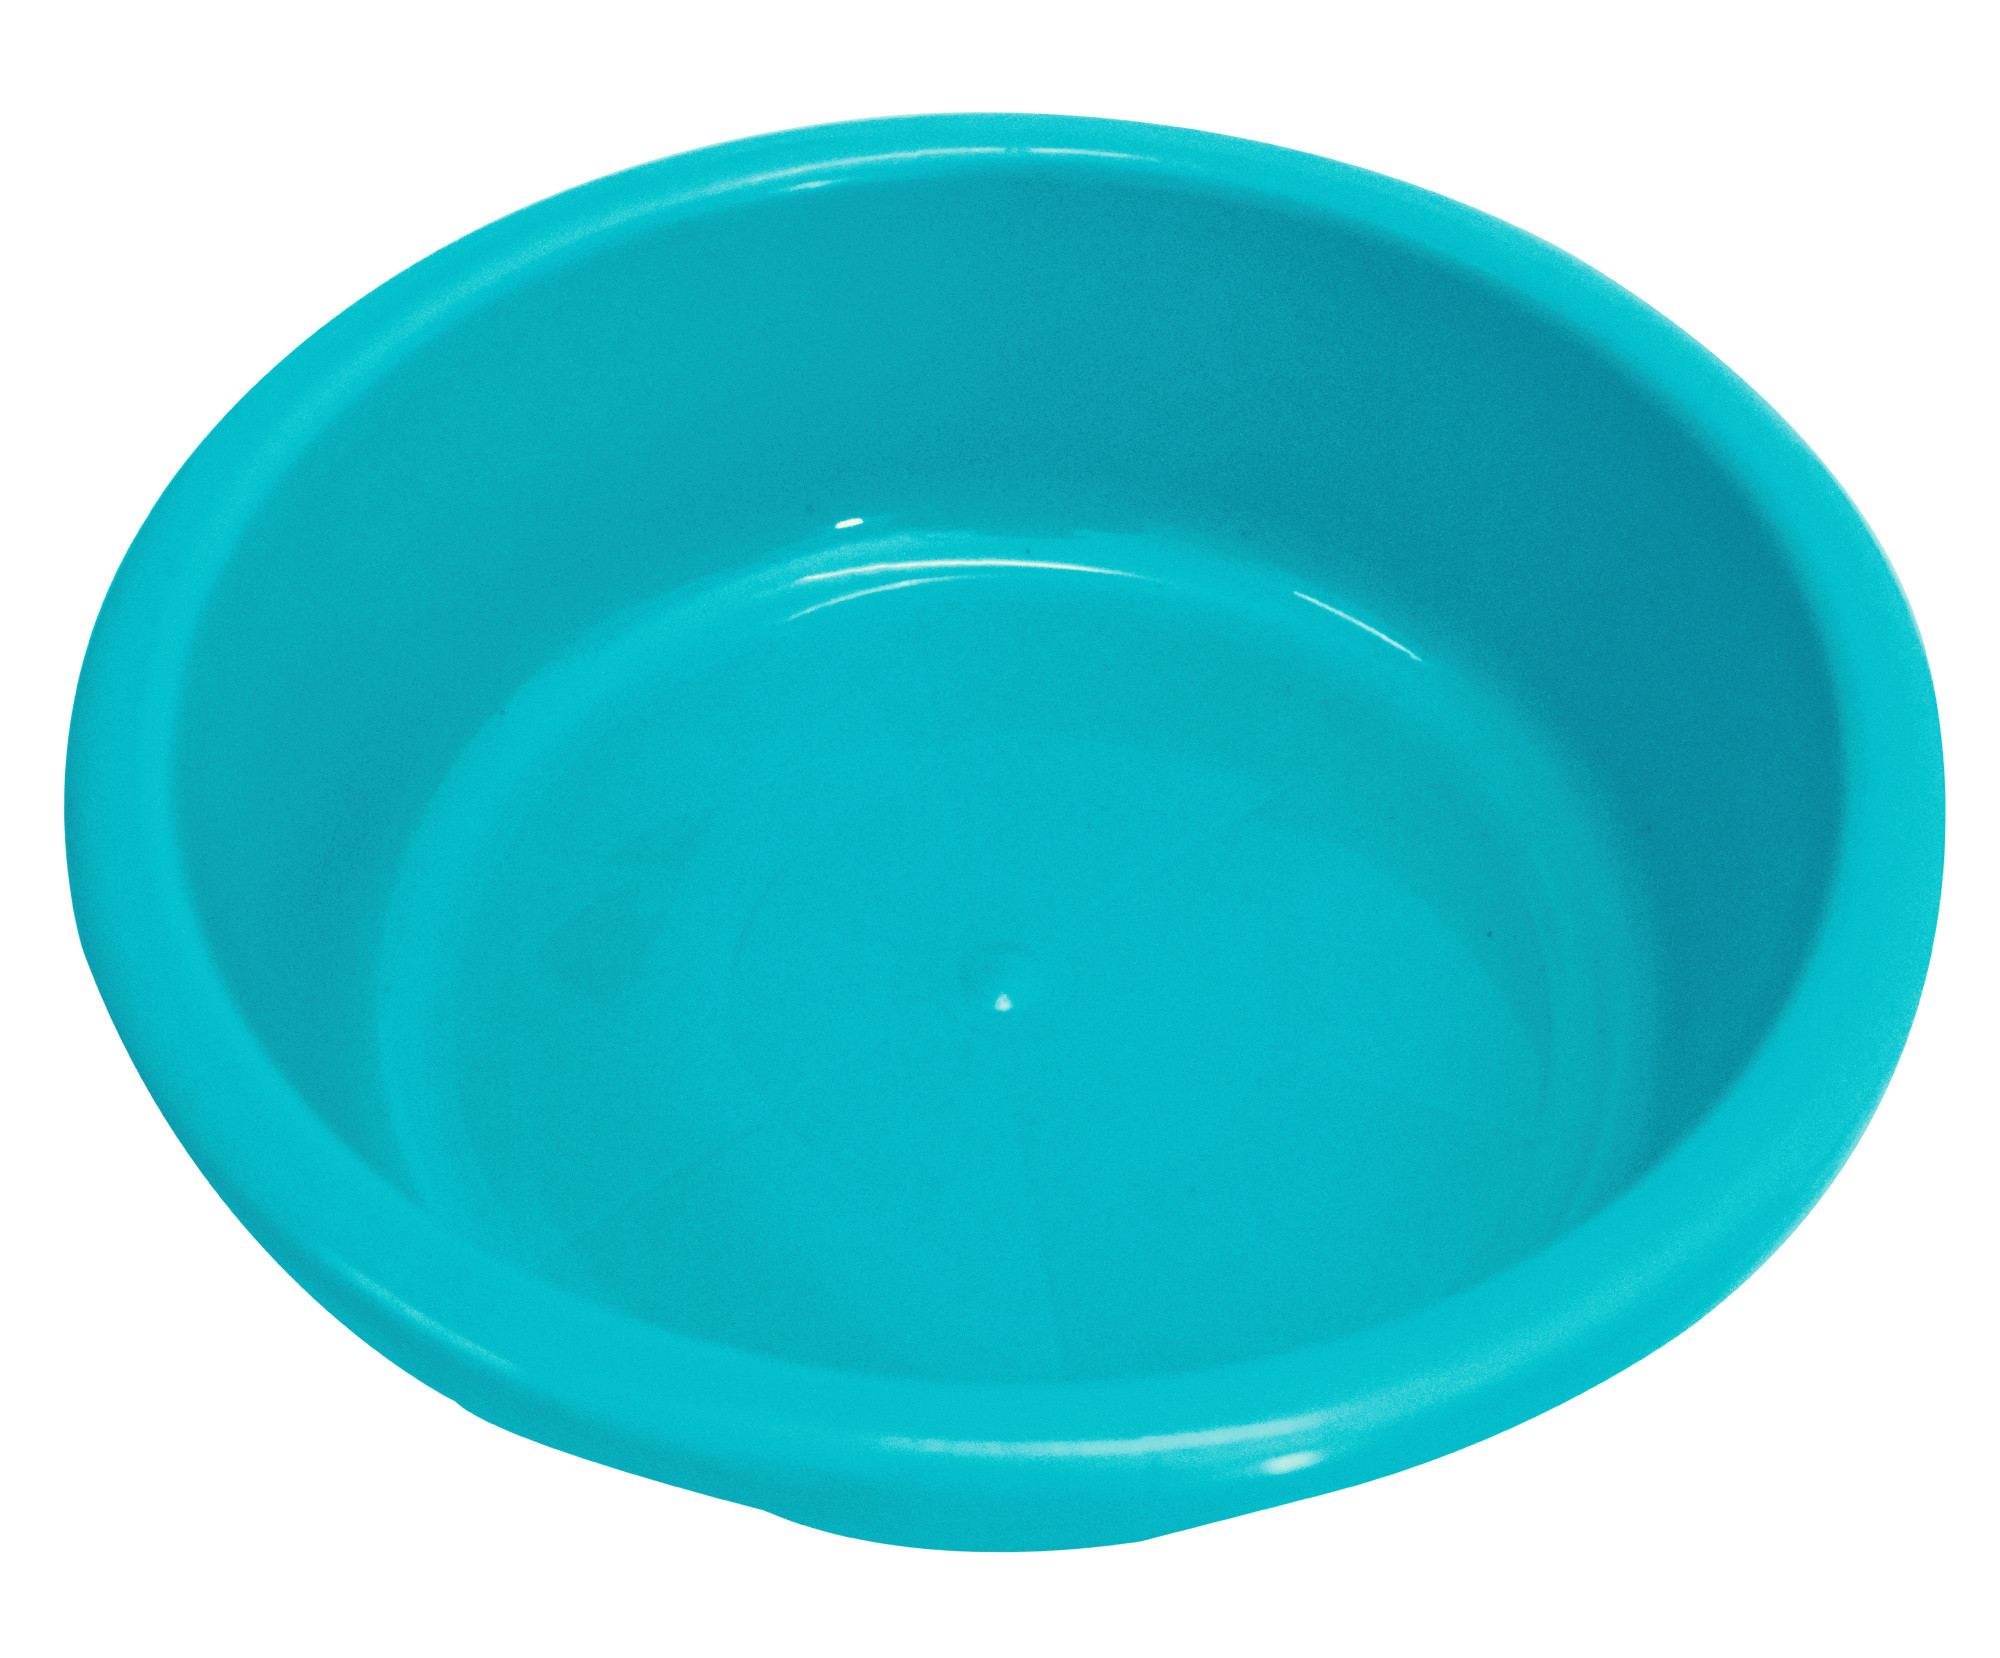 Kuber Industries Multiuses Unbreakable Plastic Knead Dough Basket/Basin Bowl For Home & Kitchen 6 Ltr- Pack of 2 (Yellow & Sky Blue)